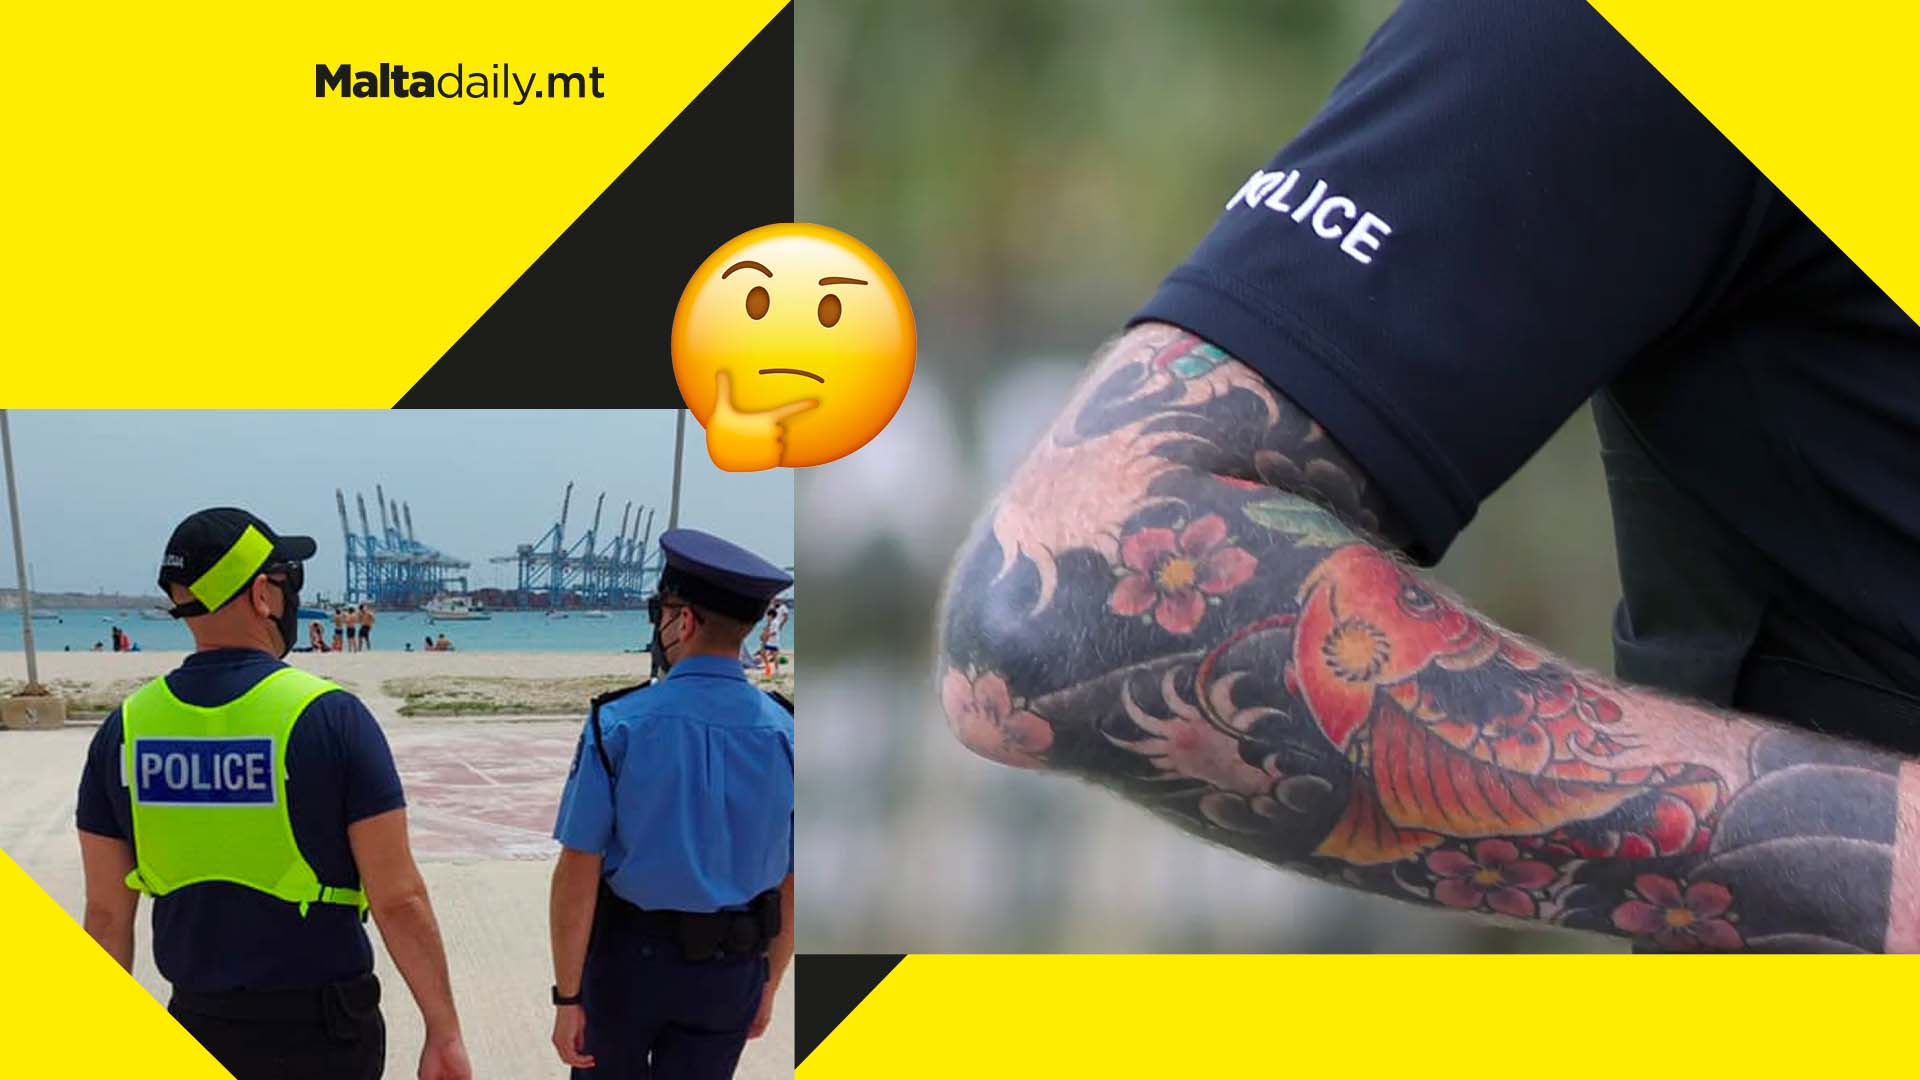 Malta’s police employ officers with coverable tattoos